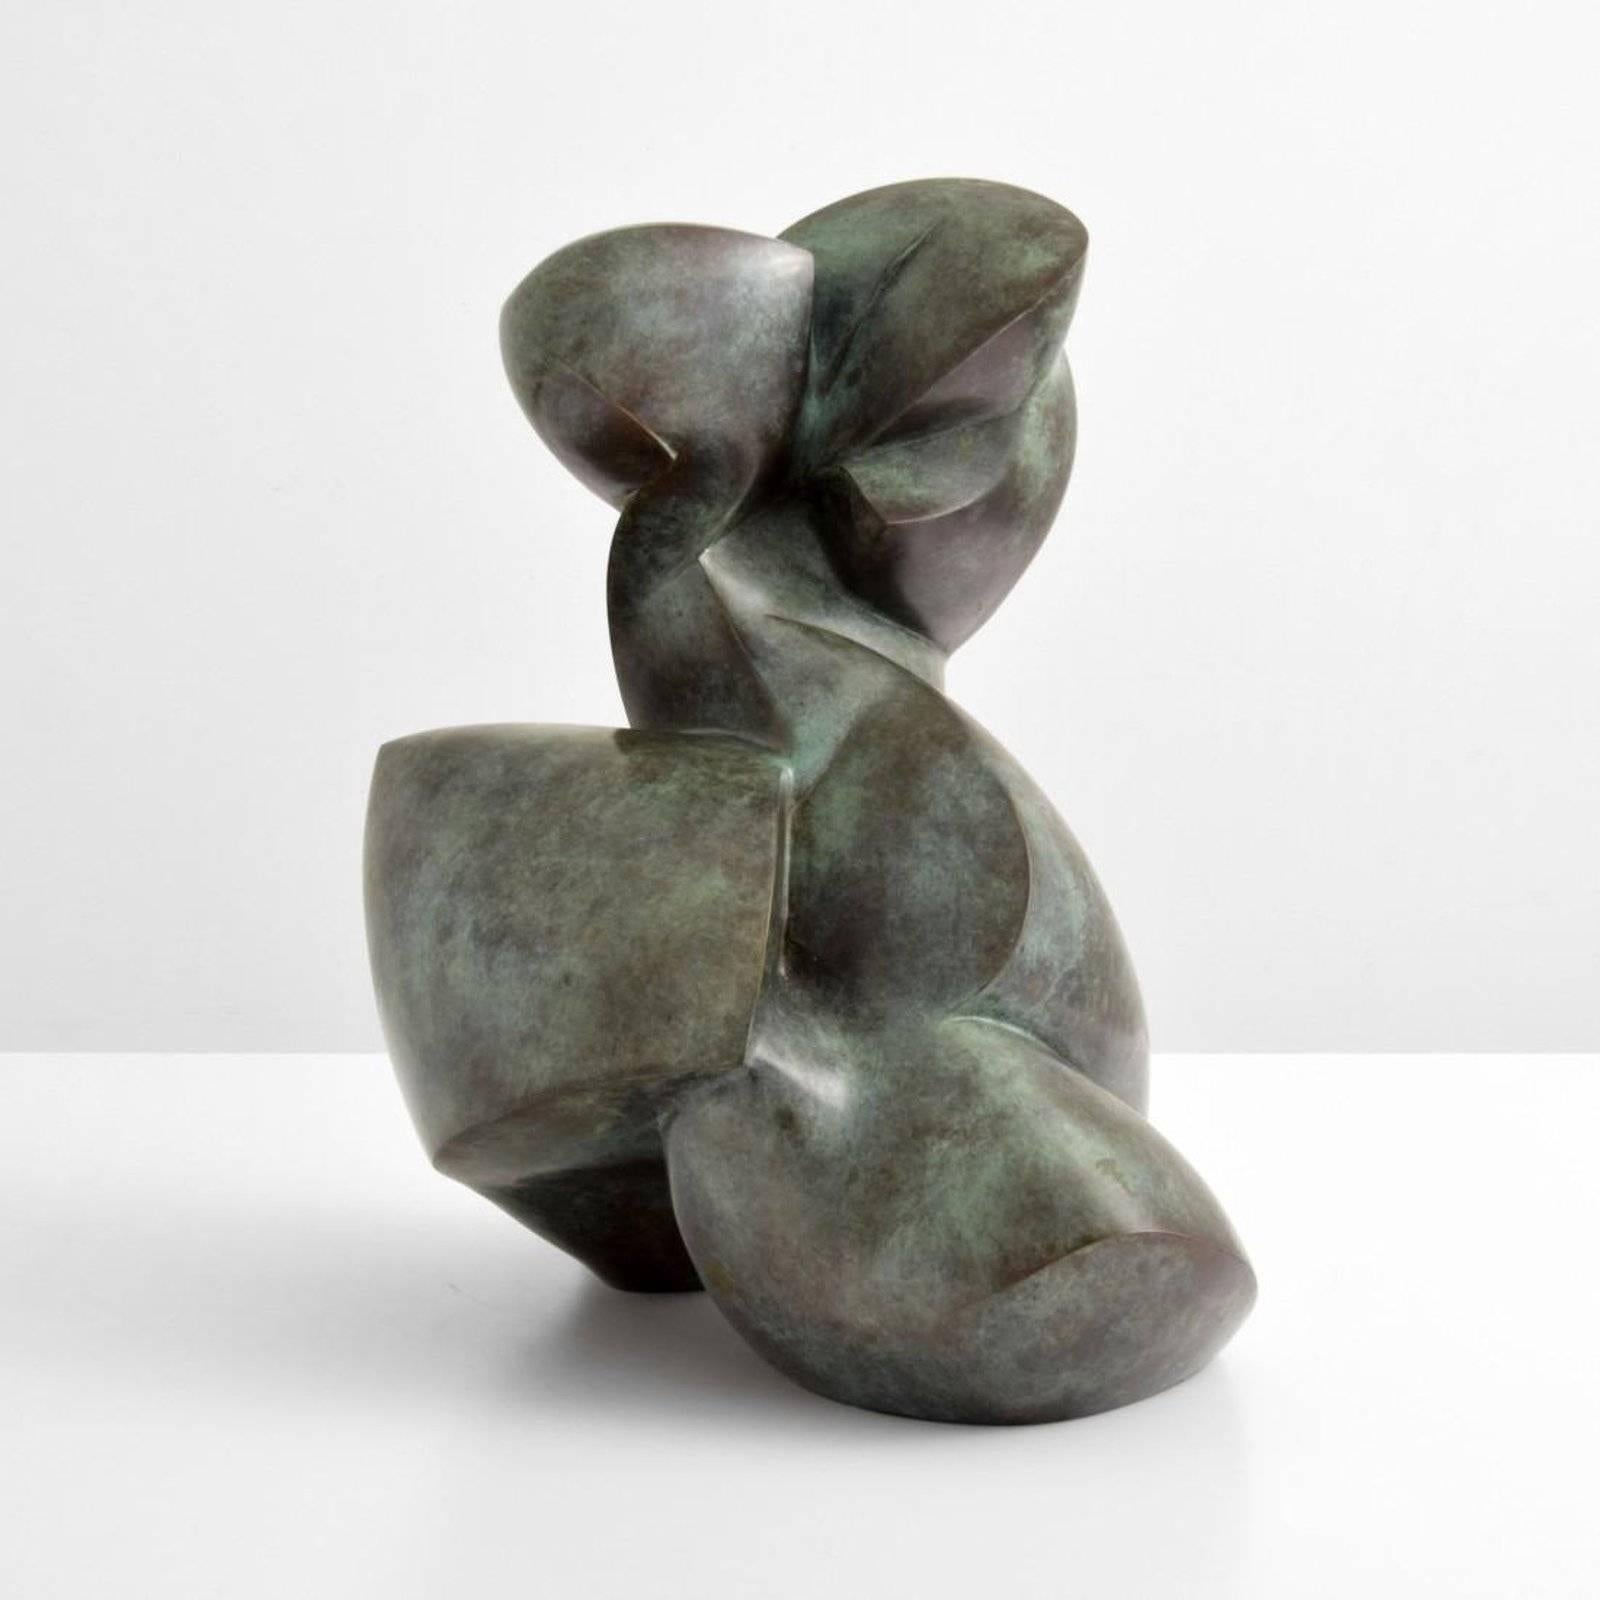 Large bronze sculpture by Dominique Polles (b. 1945).

Markings: Signed; ed. 1/4.
   